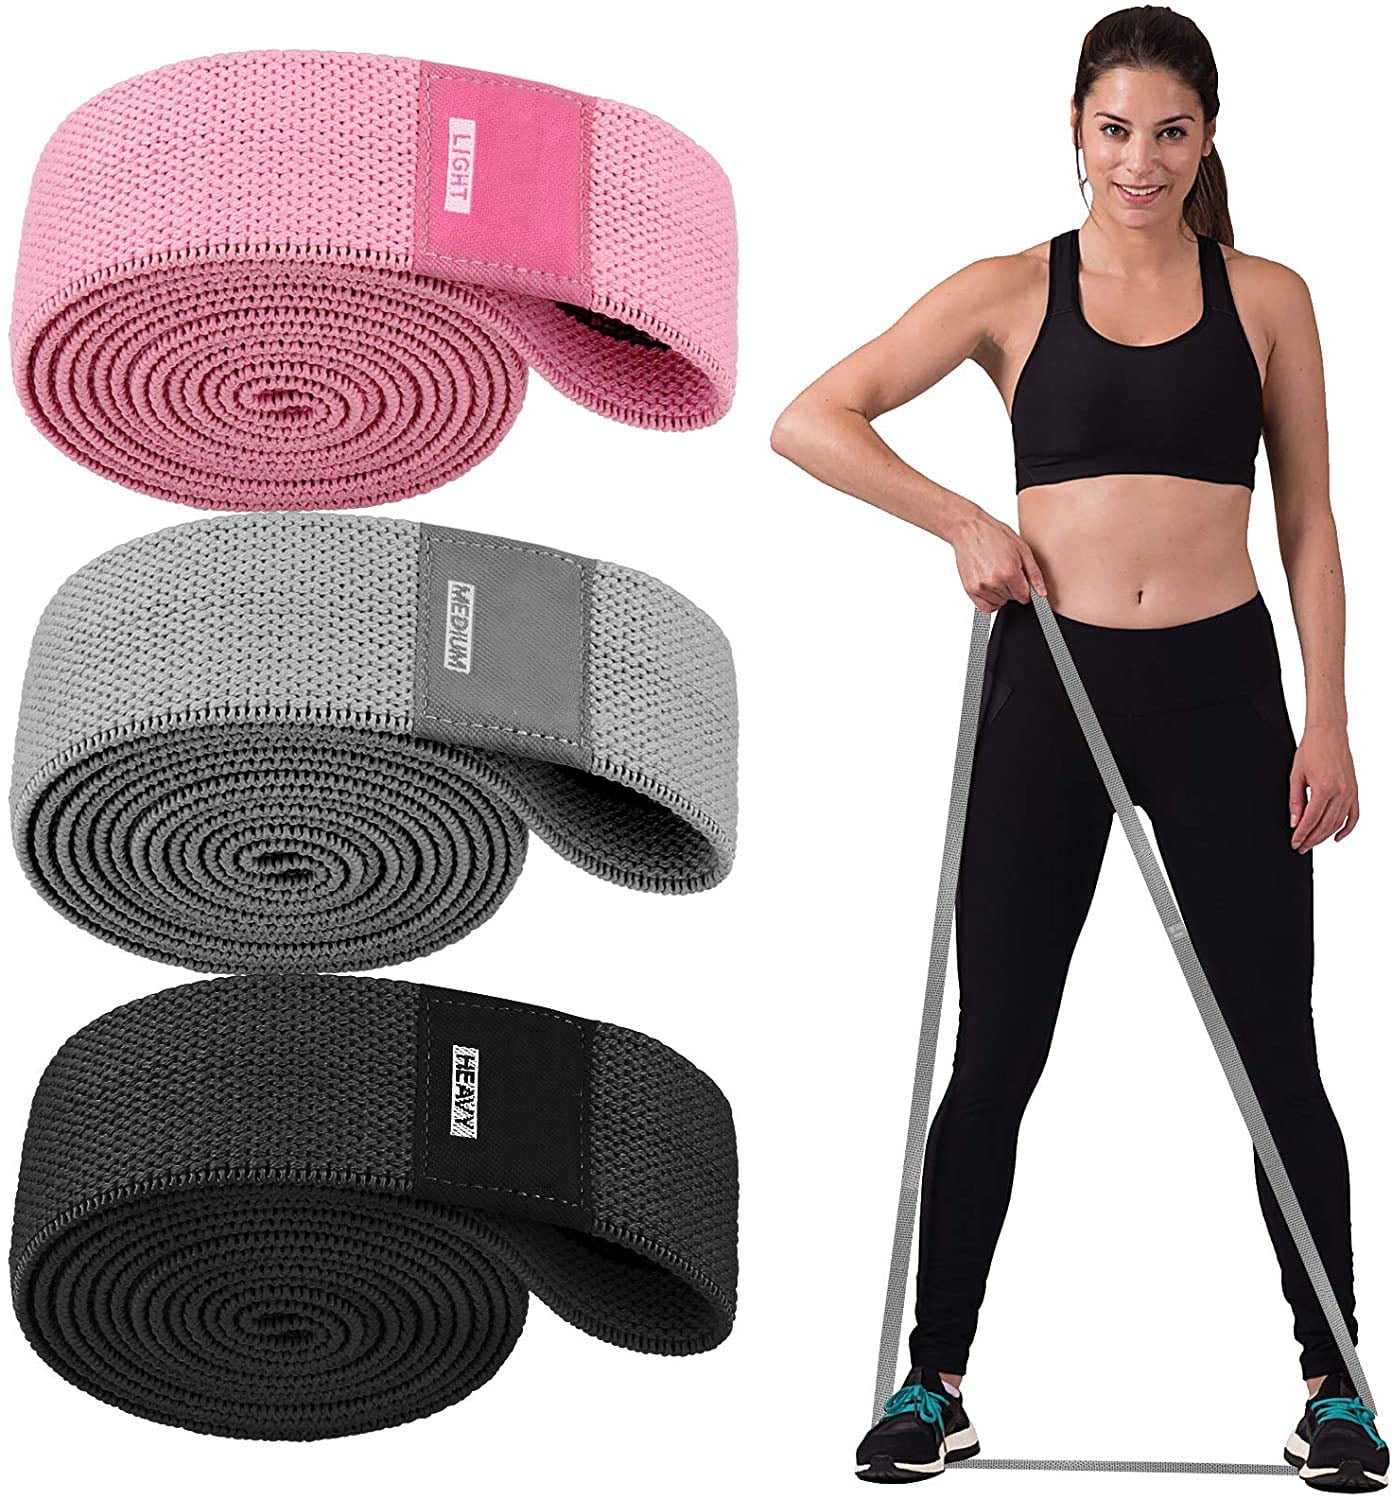 Cloth Fabric Resistance Booty Bands Loop Set of 3 Exercise Workout Fitness Gym 